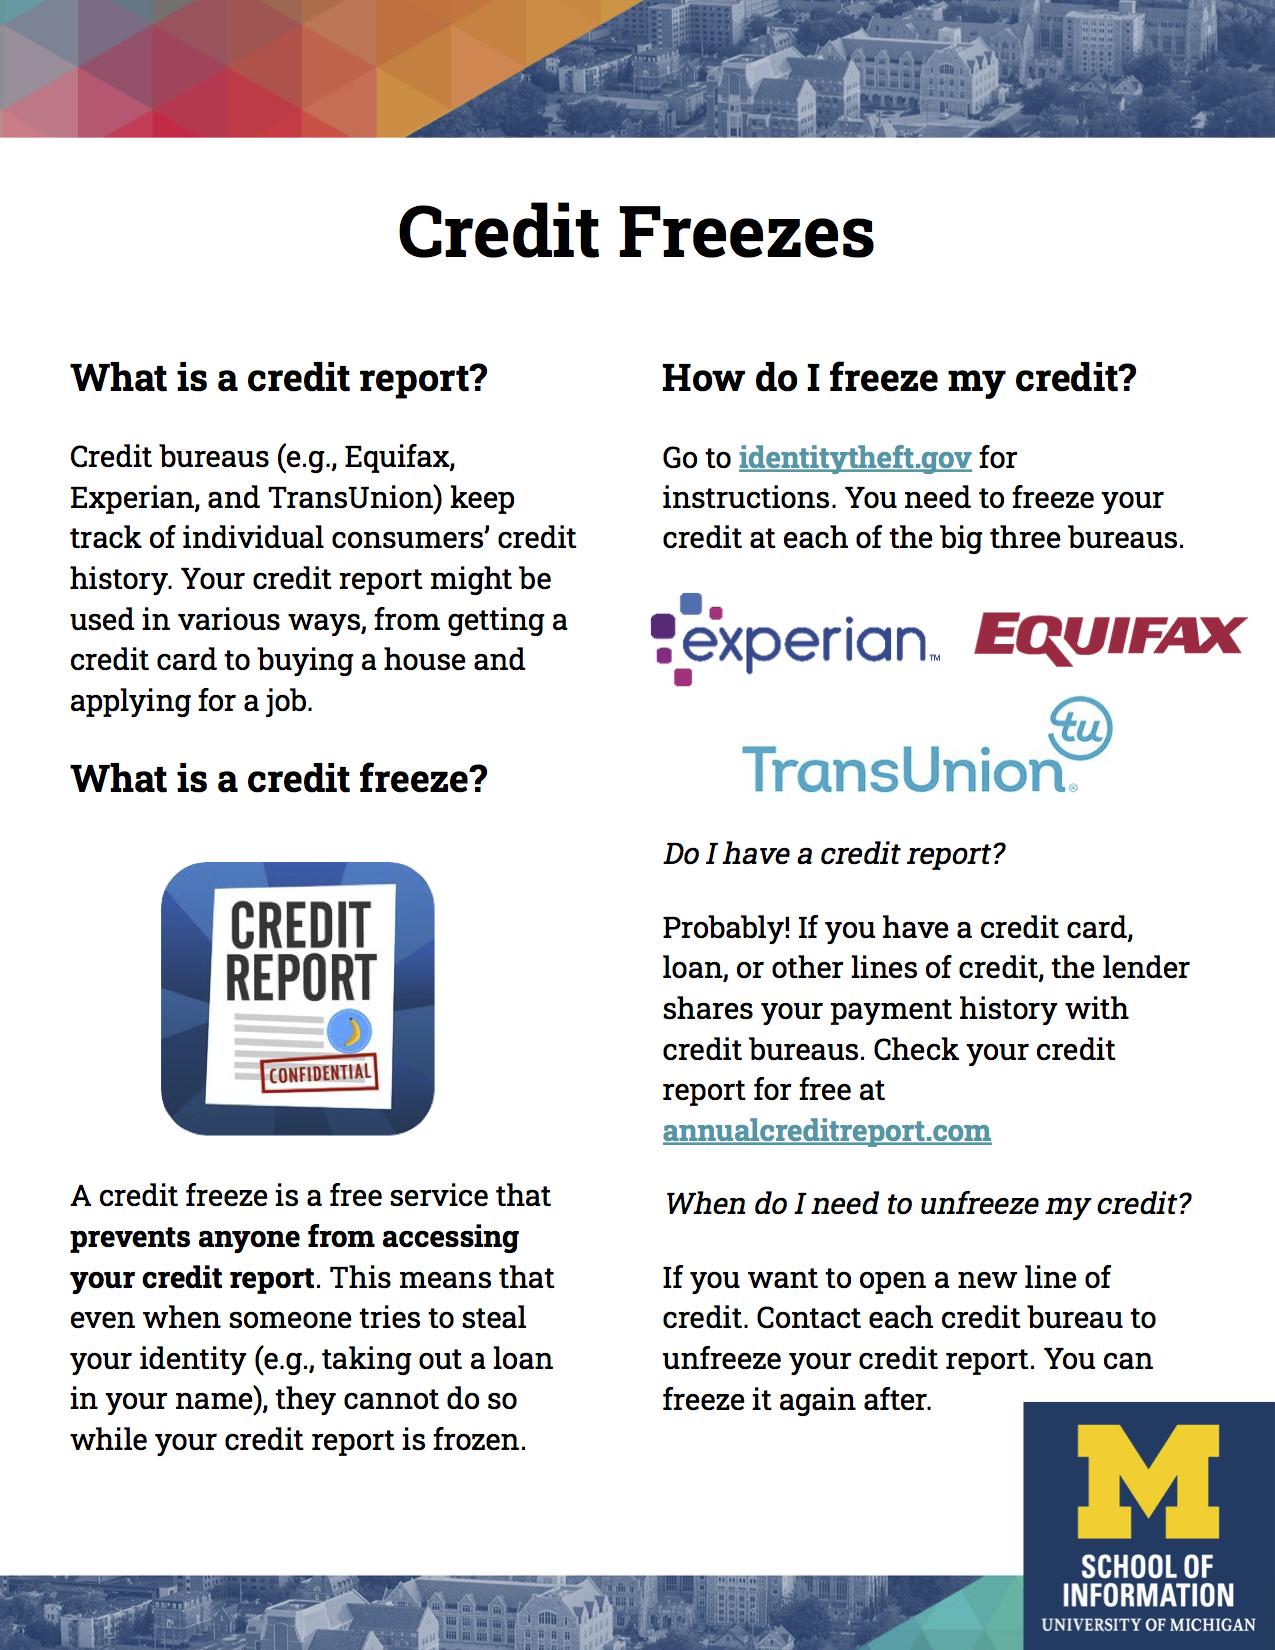 Preview of the Credit Freeze poster.